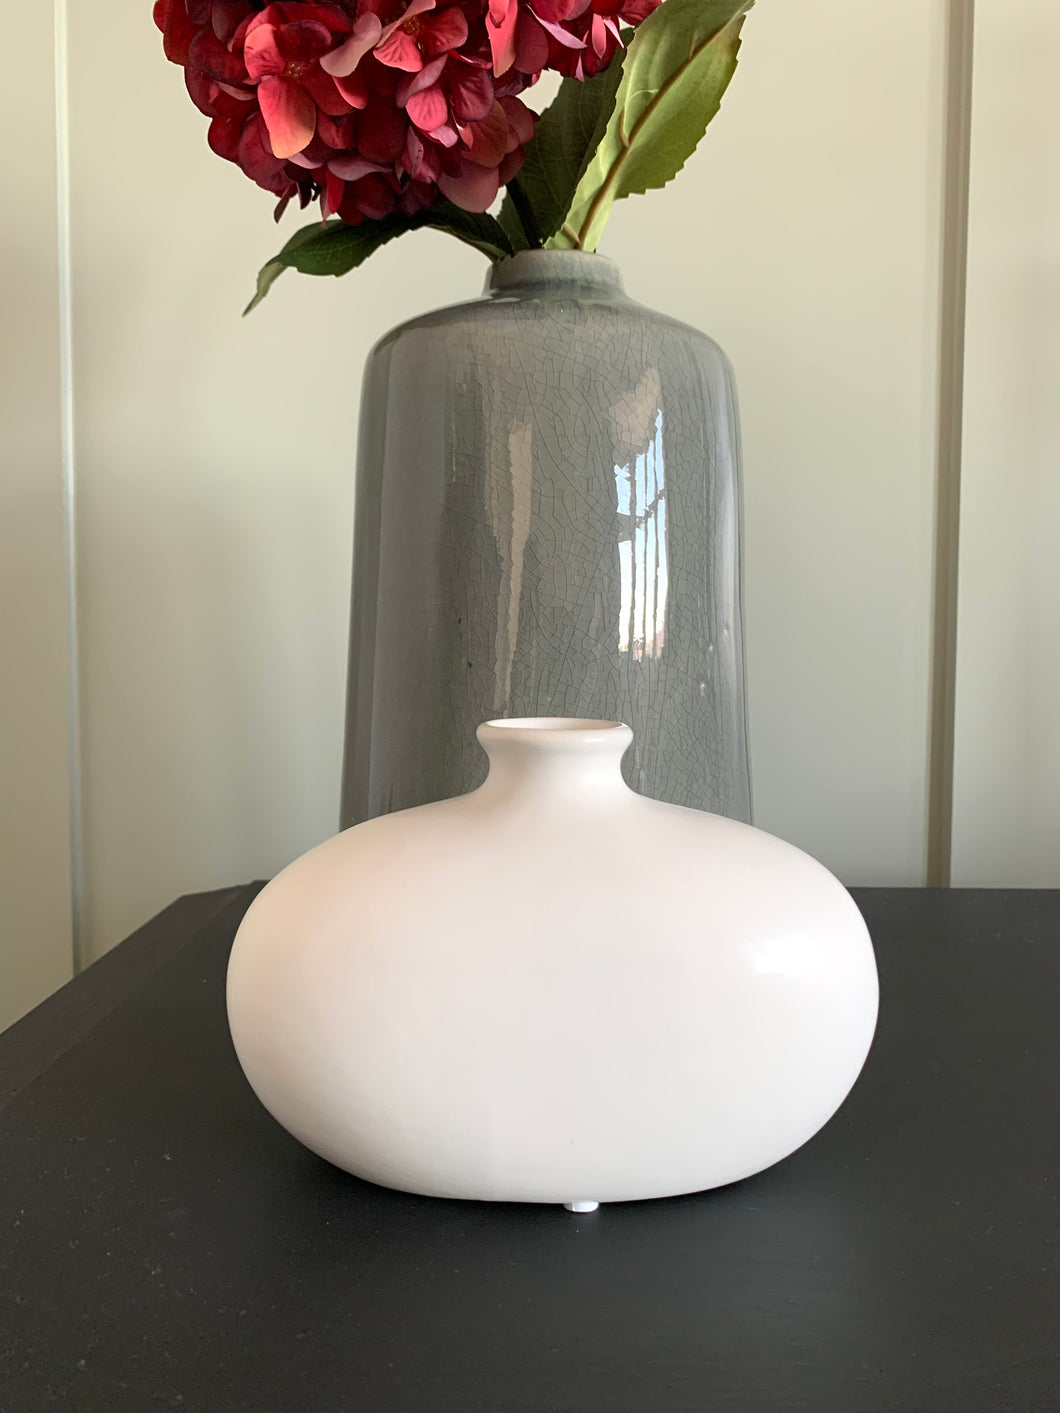 2 curved matt vases, narrow at the top and bigger at the button. One vase is Matt White and one is marble effect.